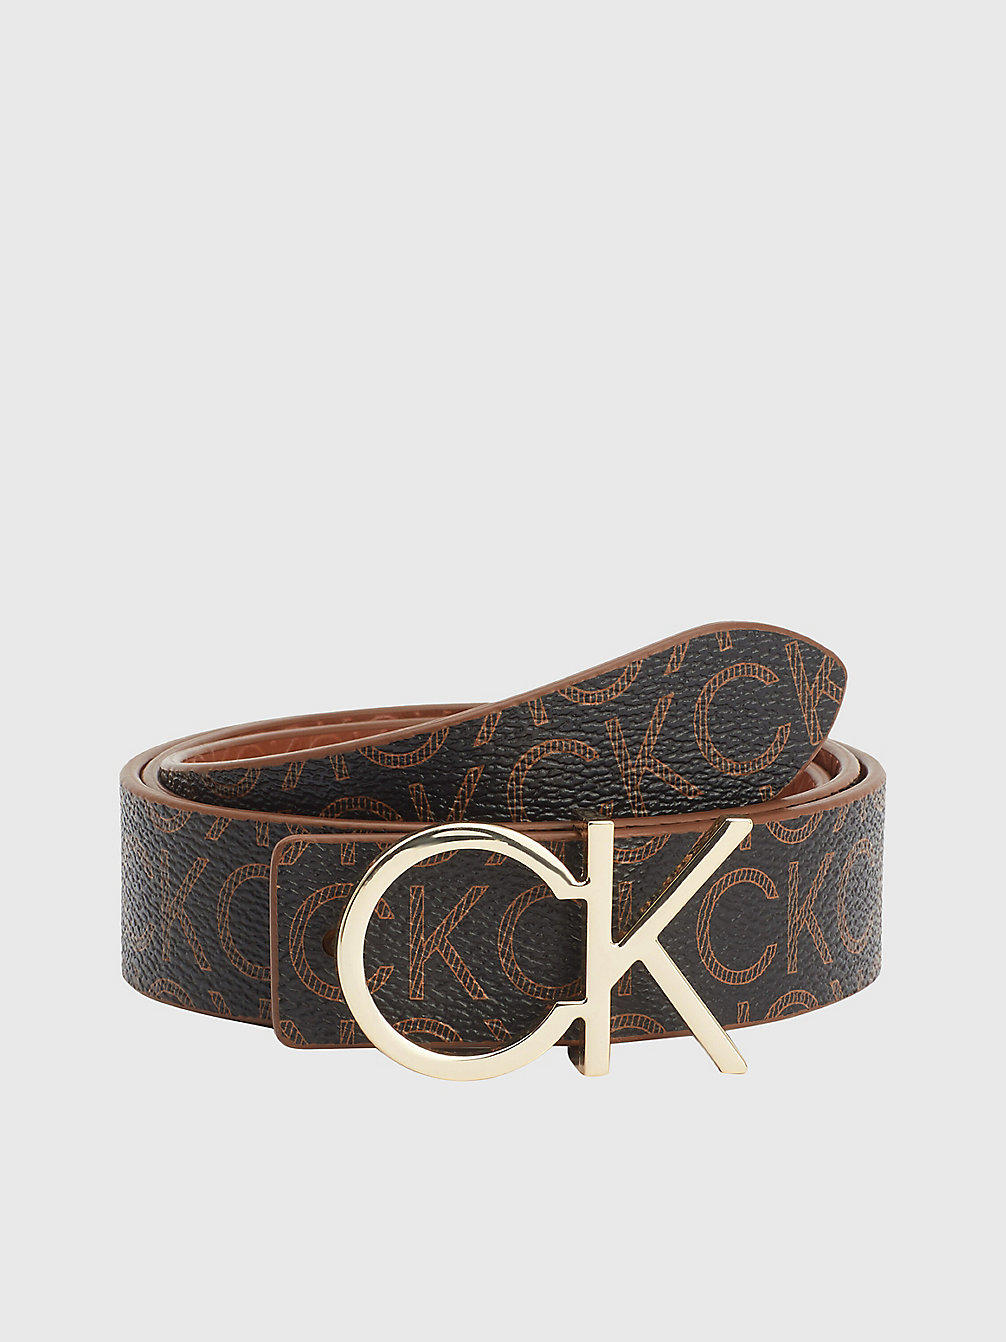 COGNAC/BROWN MONO Recycled Reversible Leather Belt undefined women Calvin Klein